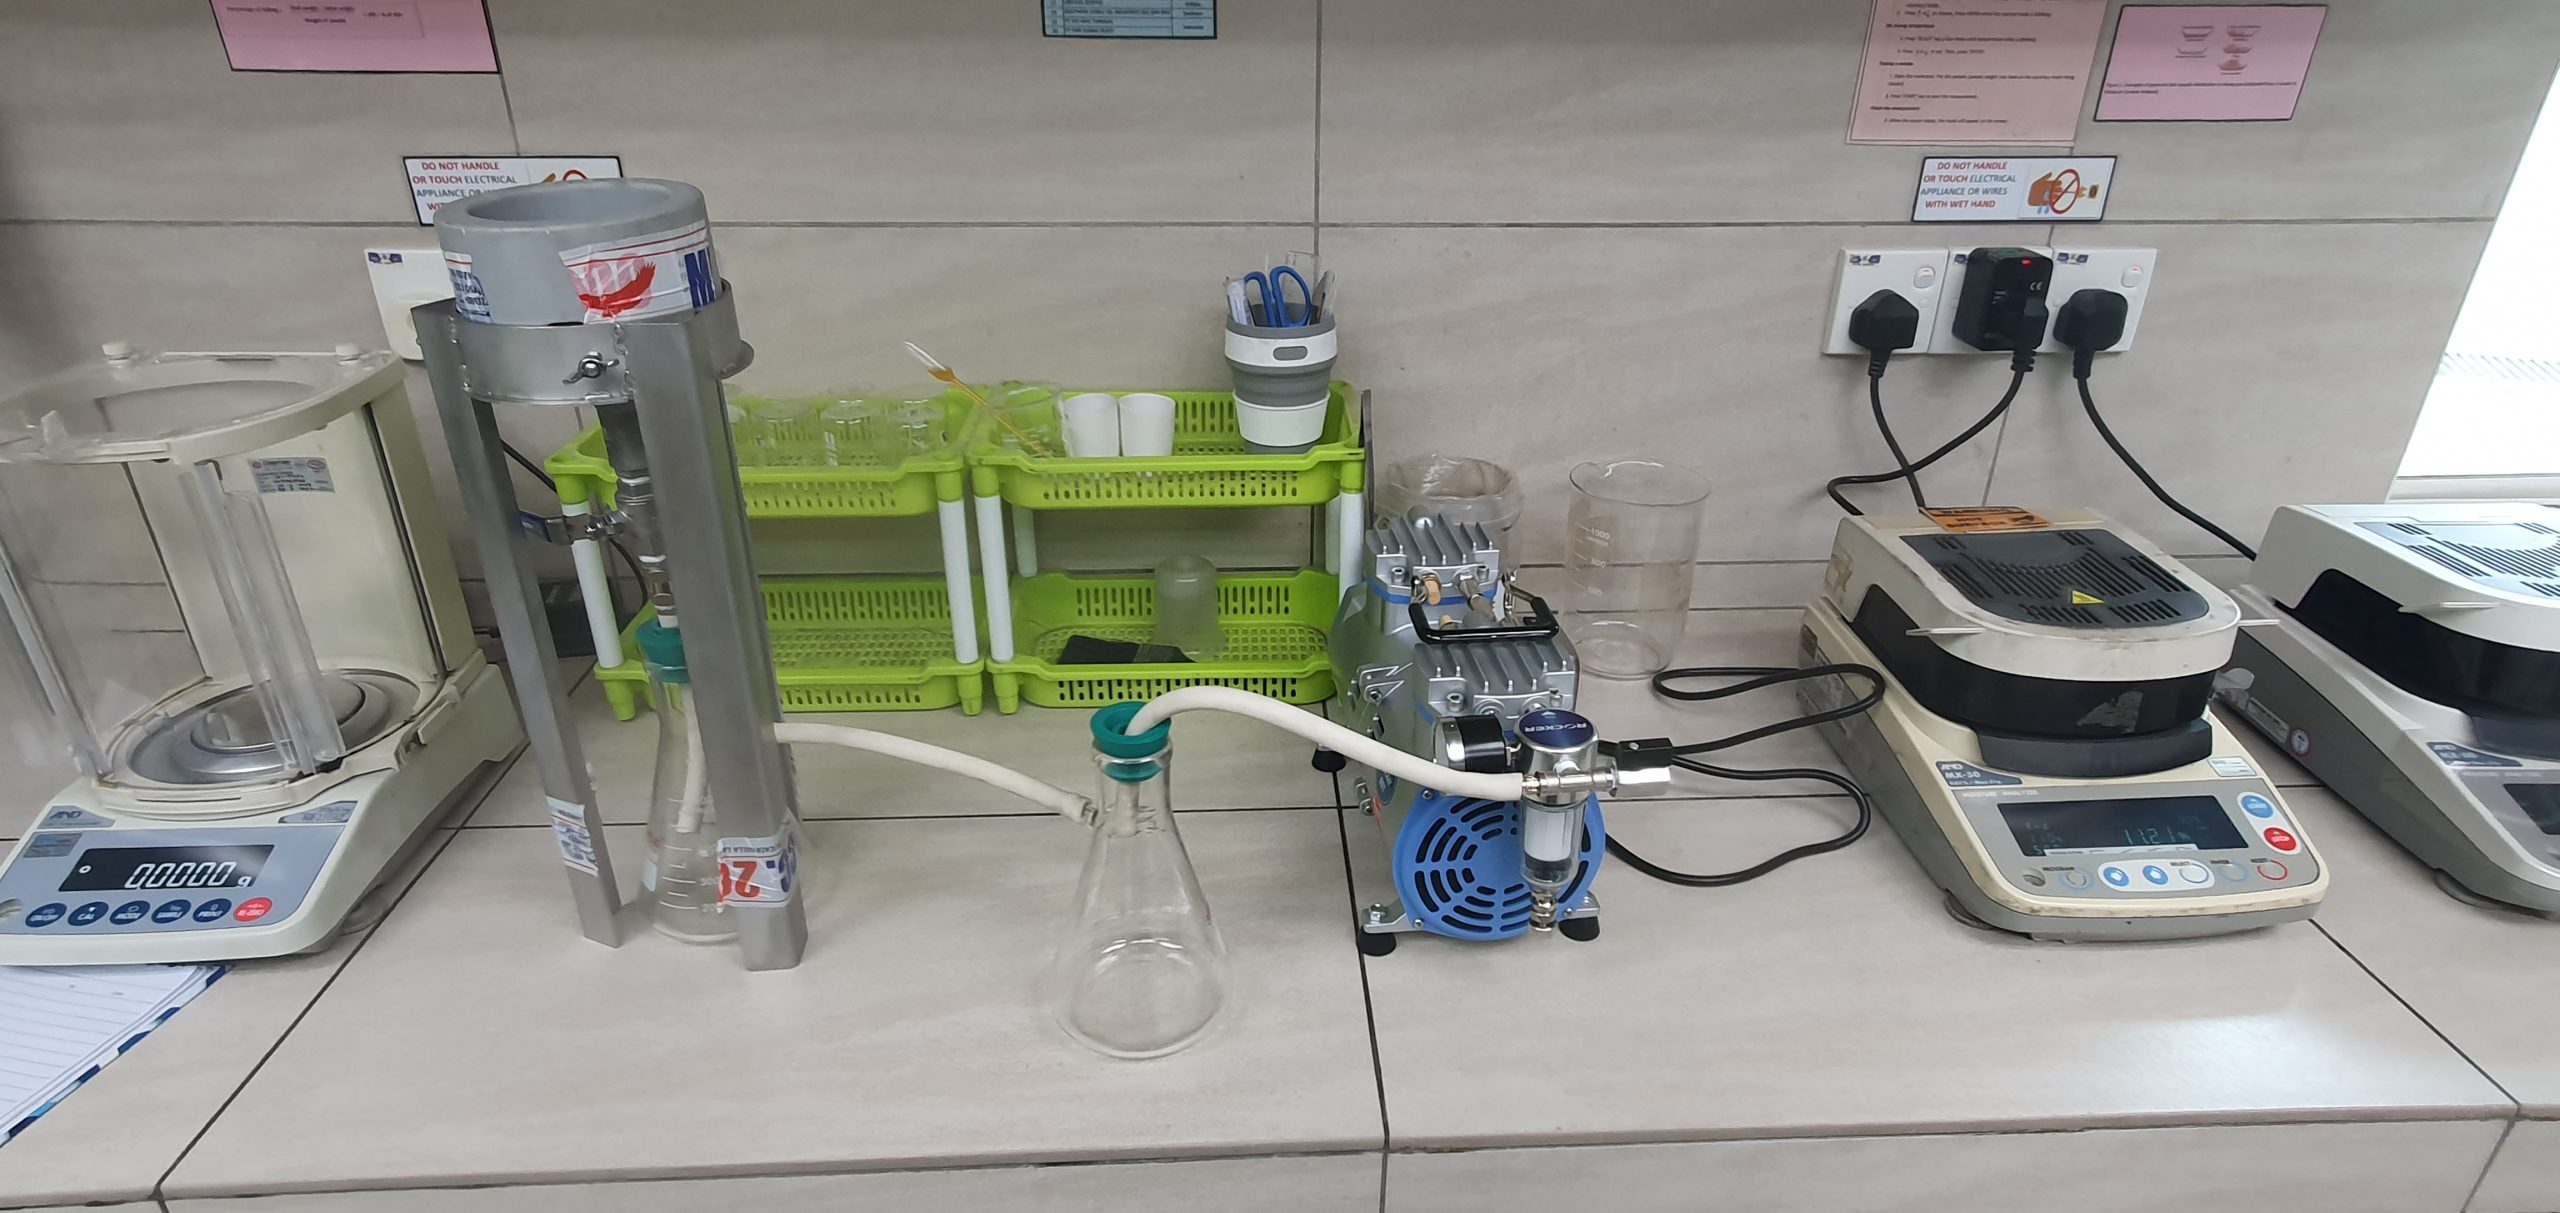 Portable laboratory kit for on-site filtration testing.